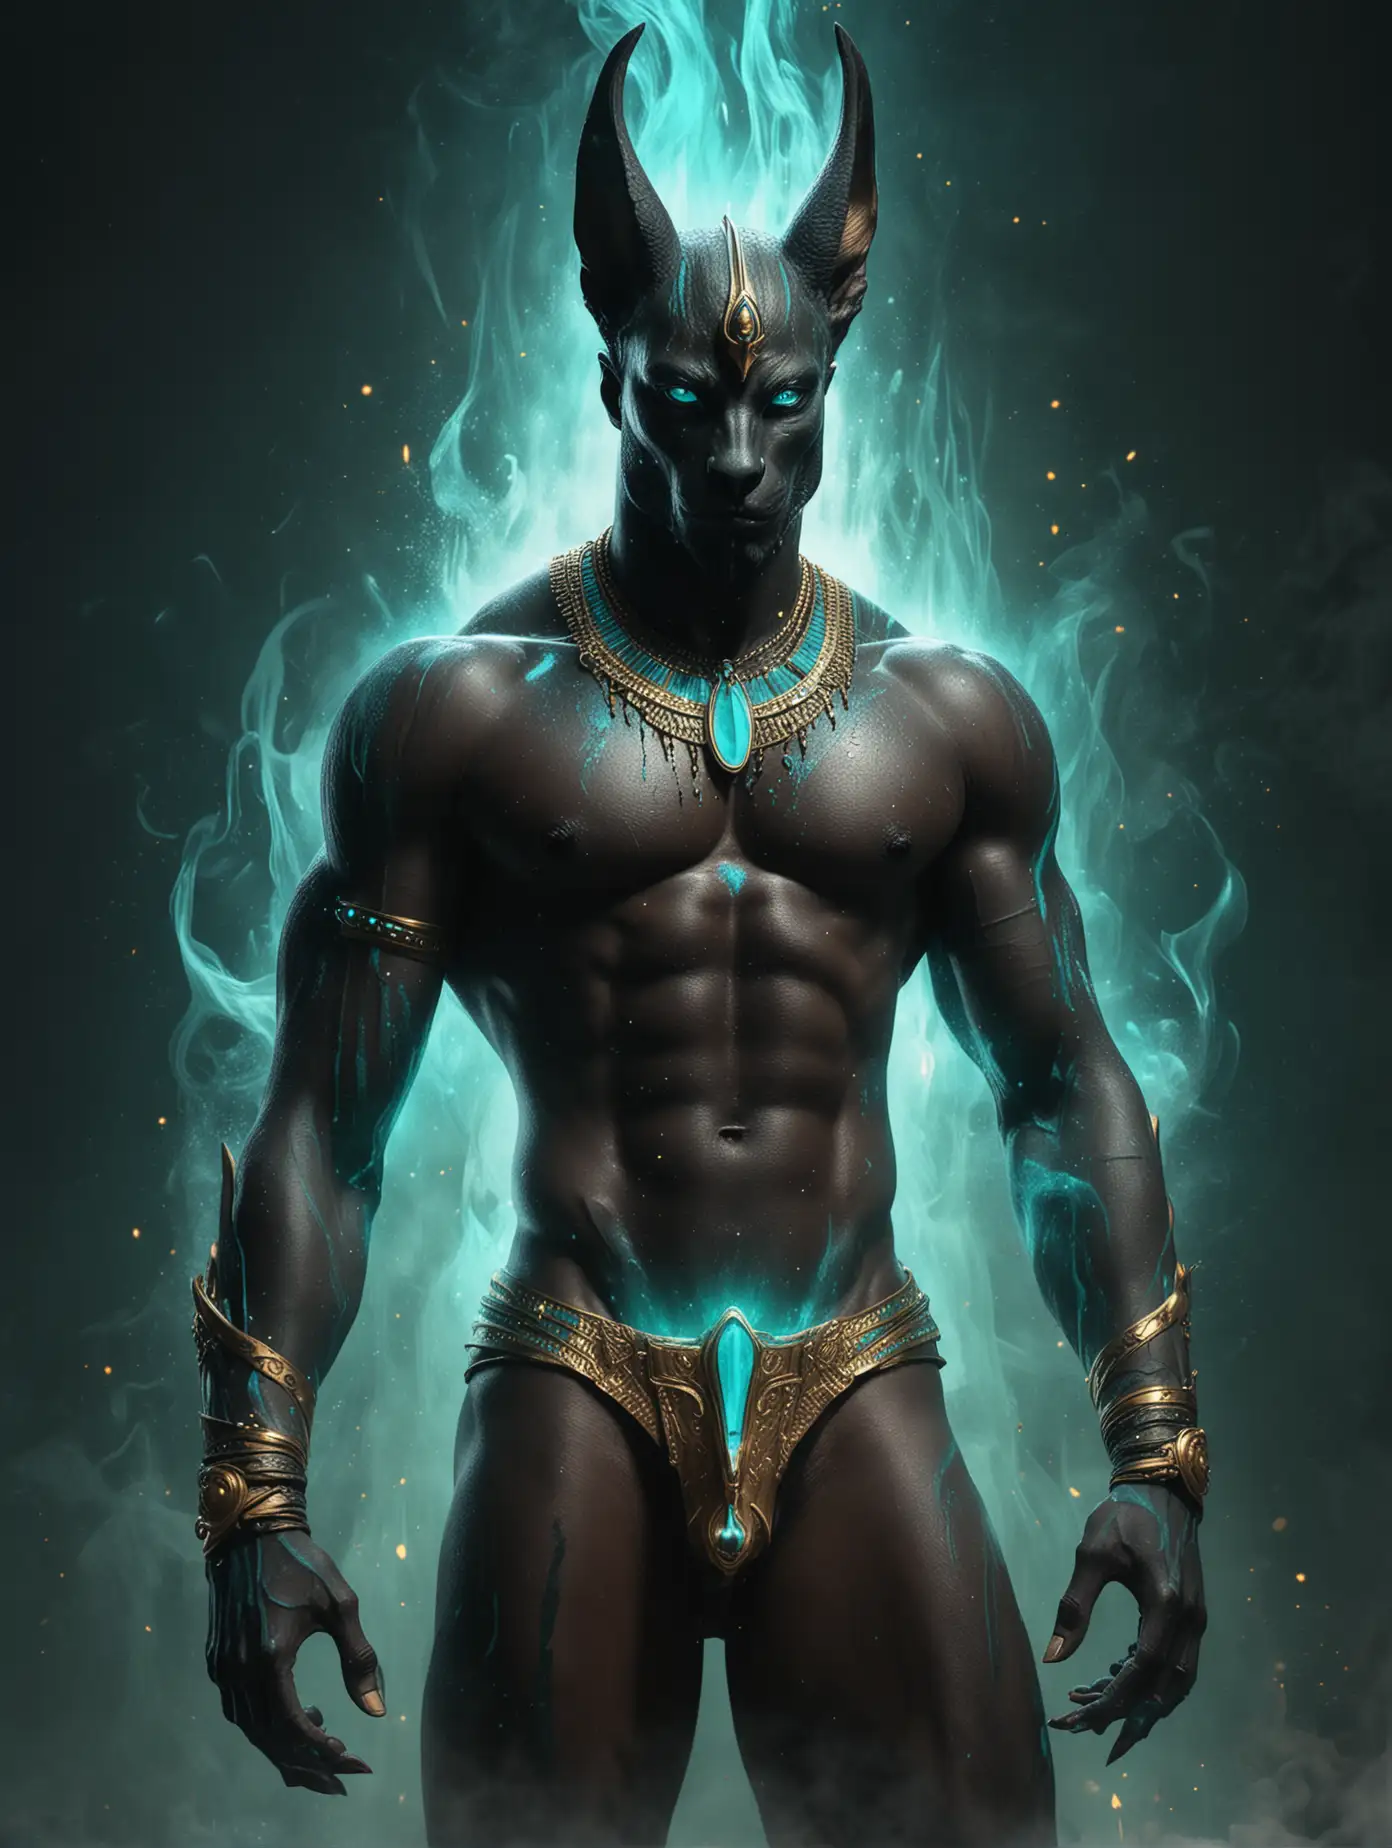 Sexy Shirtless Anubis Man with Turquoise Glow and Gold Sparks